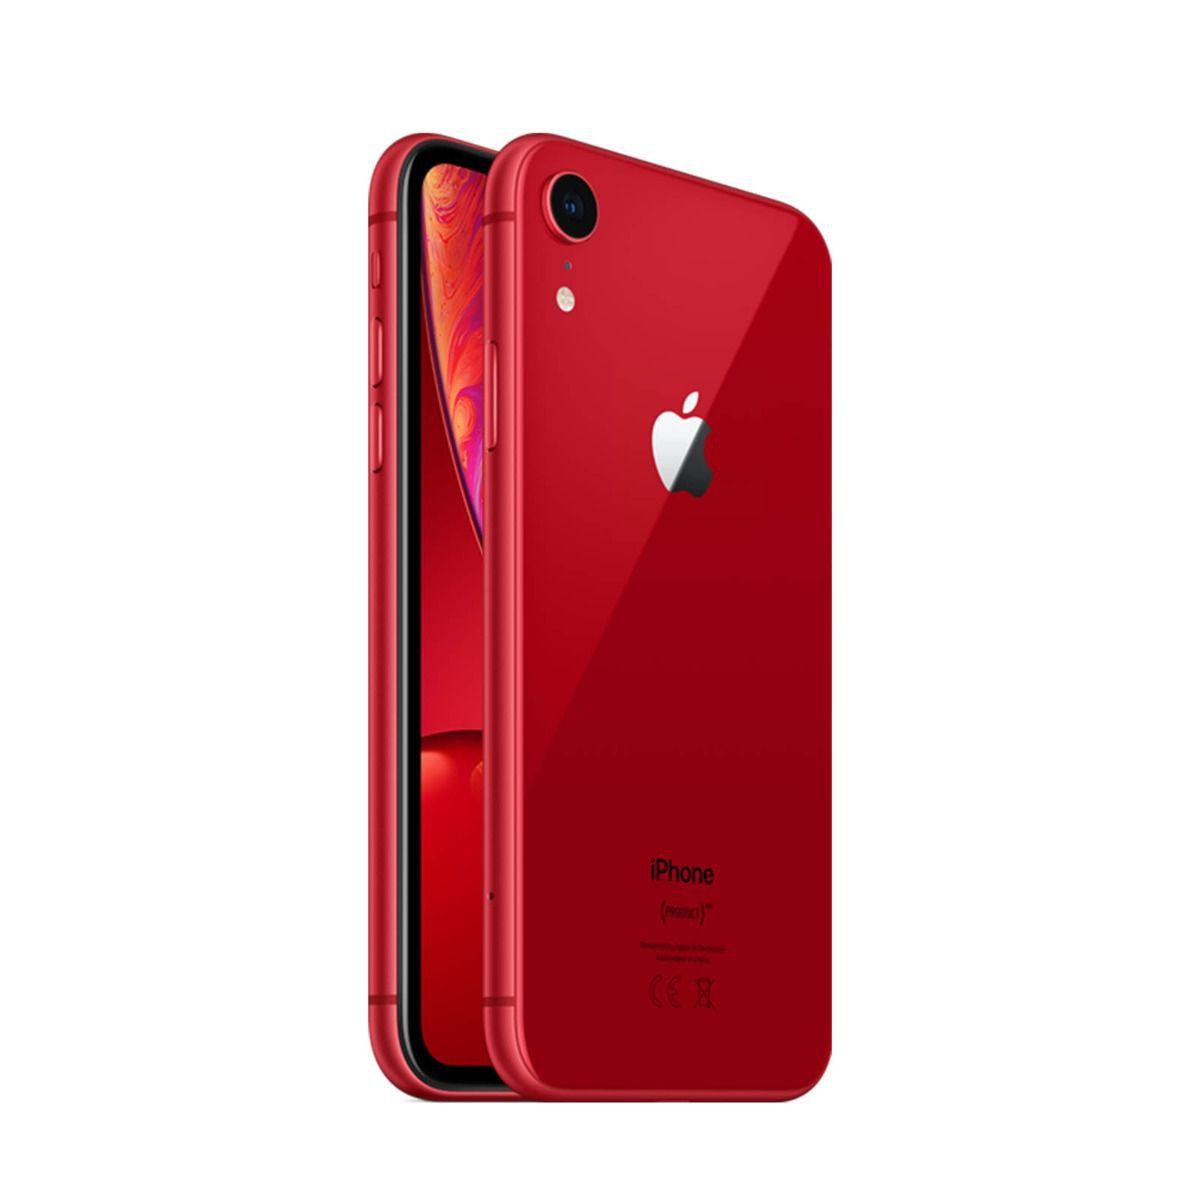 Cyber Monday Iphone 11 And Xr Deals 24 Per Month And 10 Cashback